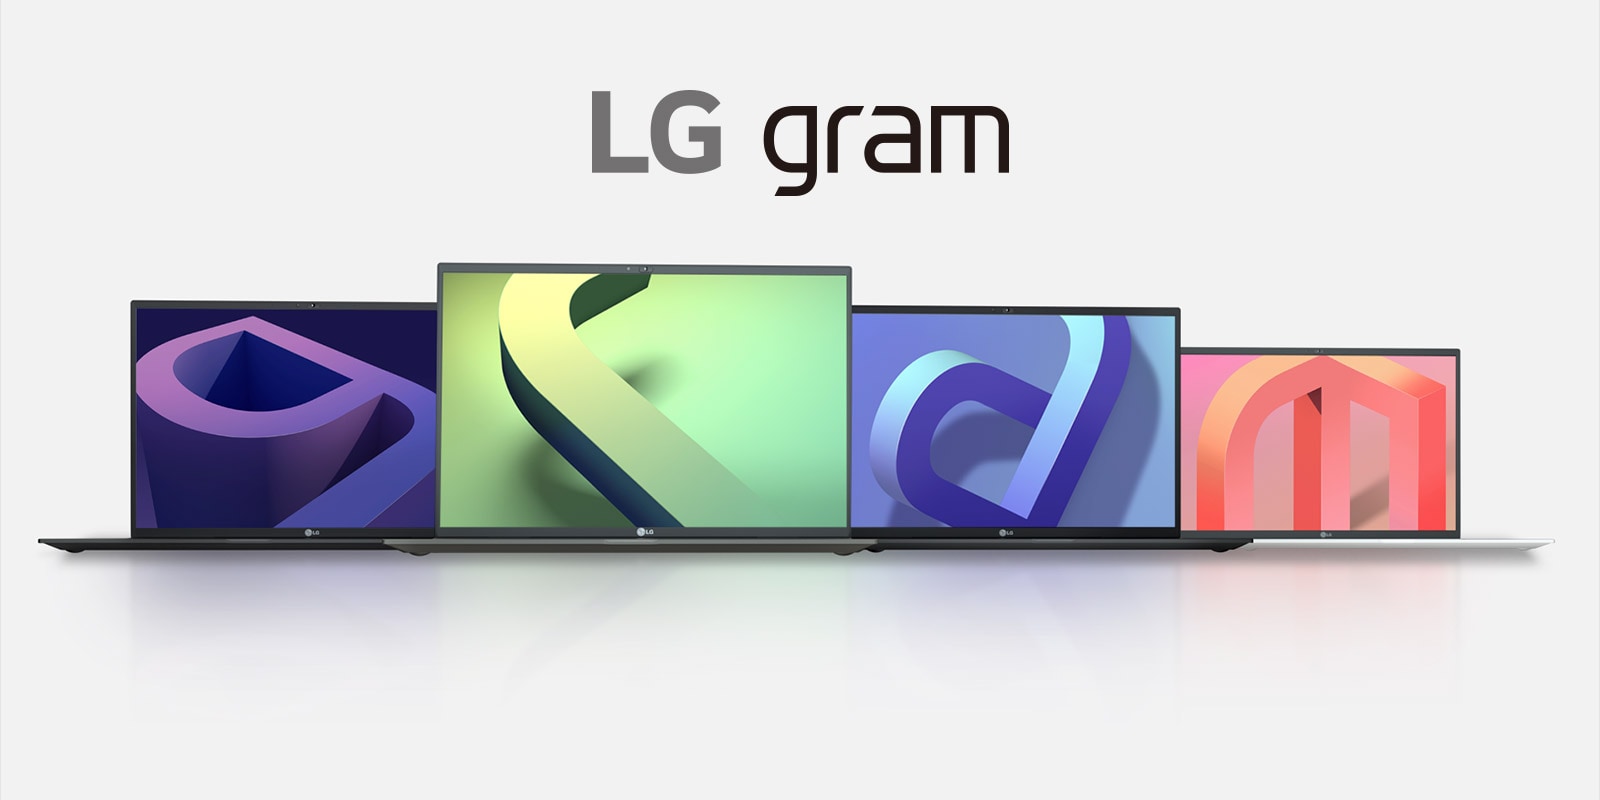 display of 4 LG gram laptops with infills